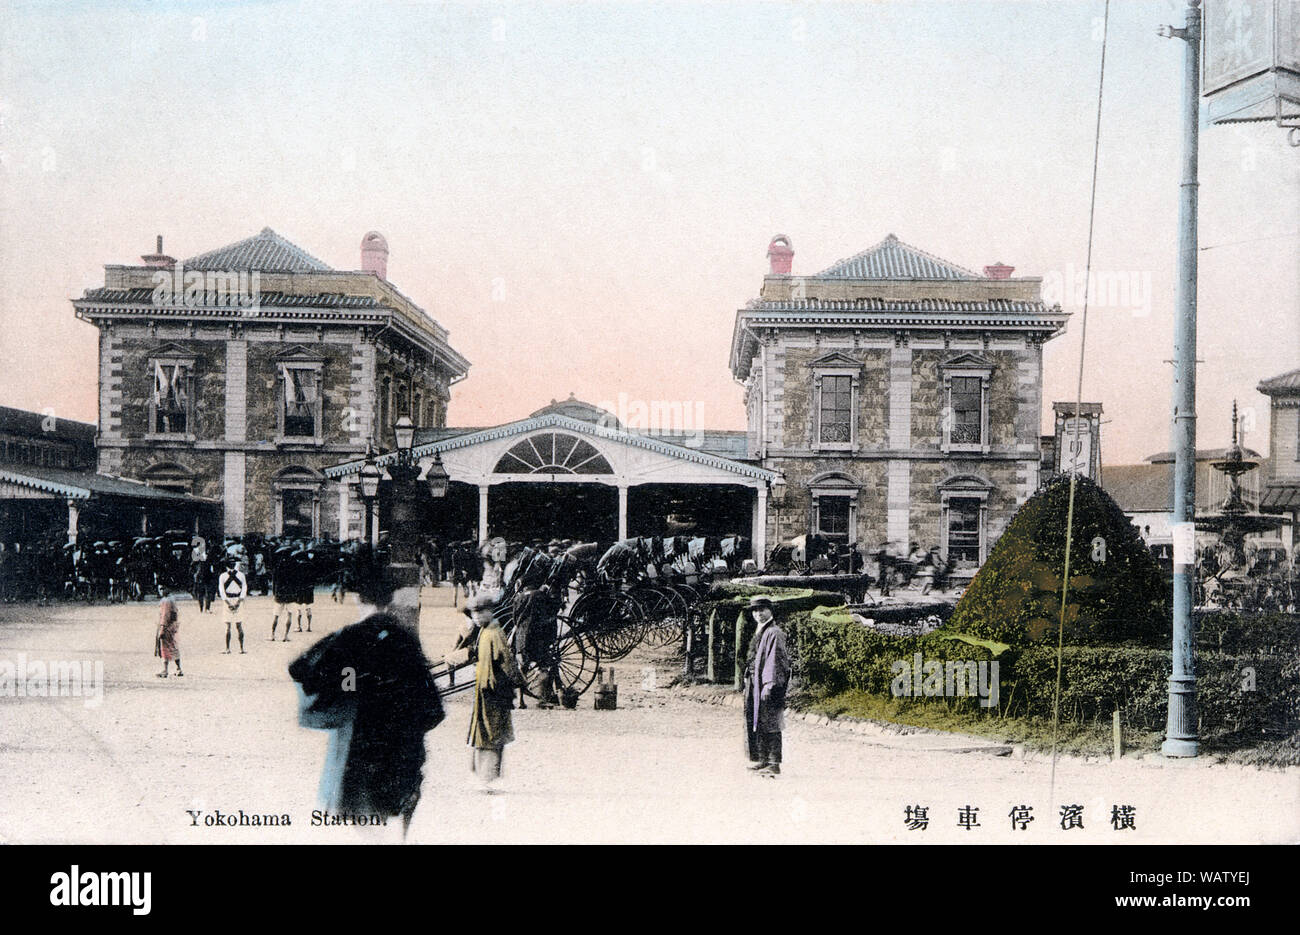 [ 1900s Japan - Yokohama Station ] —   Yokohama Station in Yokohama, Kanagawa Prefecture was a terminal station on Japan’s very first railroad, opened on June 12, 1872 (Meiji 5).  The station was designed by American architect Richard P. Bridgens who in 1864 (Genji 1) had come to Japan from San Francisco.   Besides Yokohama Station and its twin, Shinbashi Station, he designed many other buildings that played important roles during the Meiji Period.  20th century vintage postcard. Stock Photo